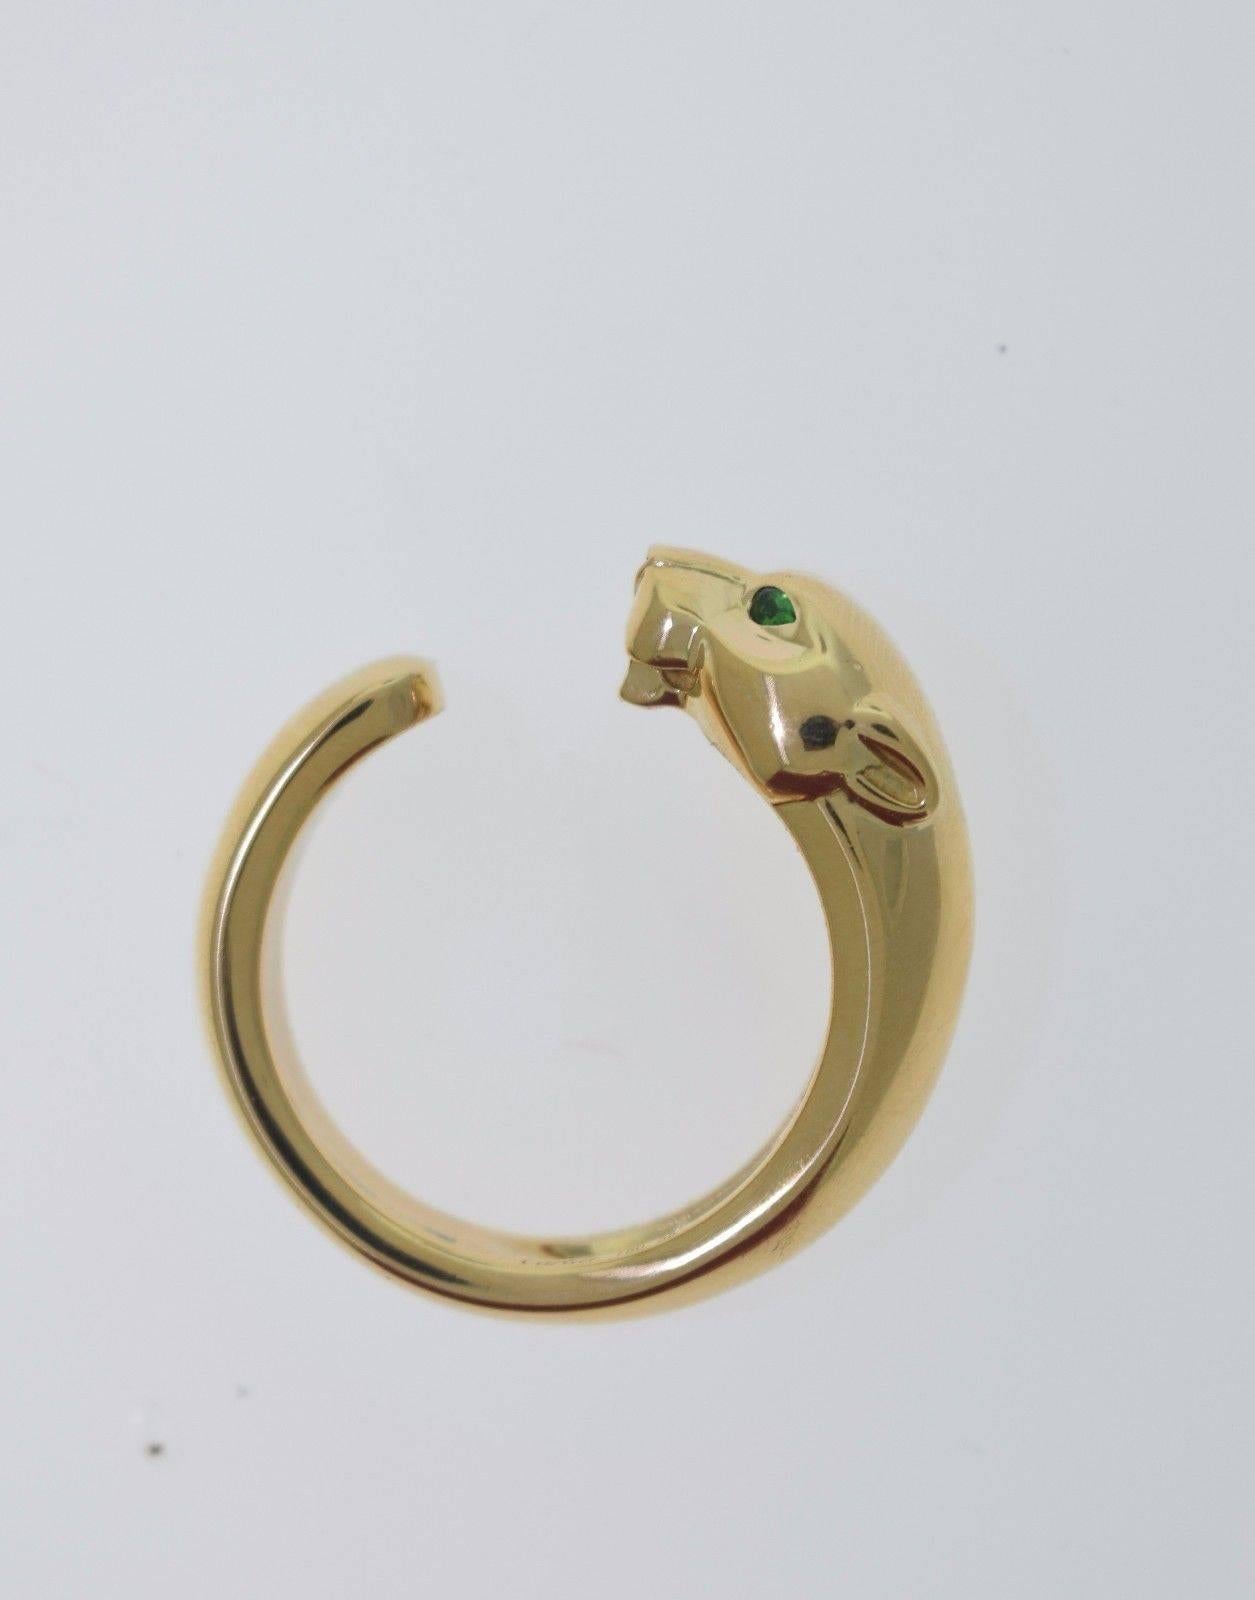 Cartier Panthère Onyx Tsavorite Garnet Gold Ring In Excellent Condition For Sale In Miami, FL